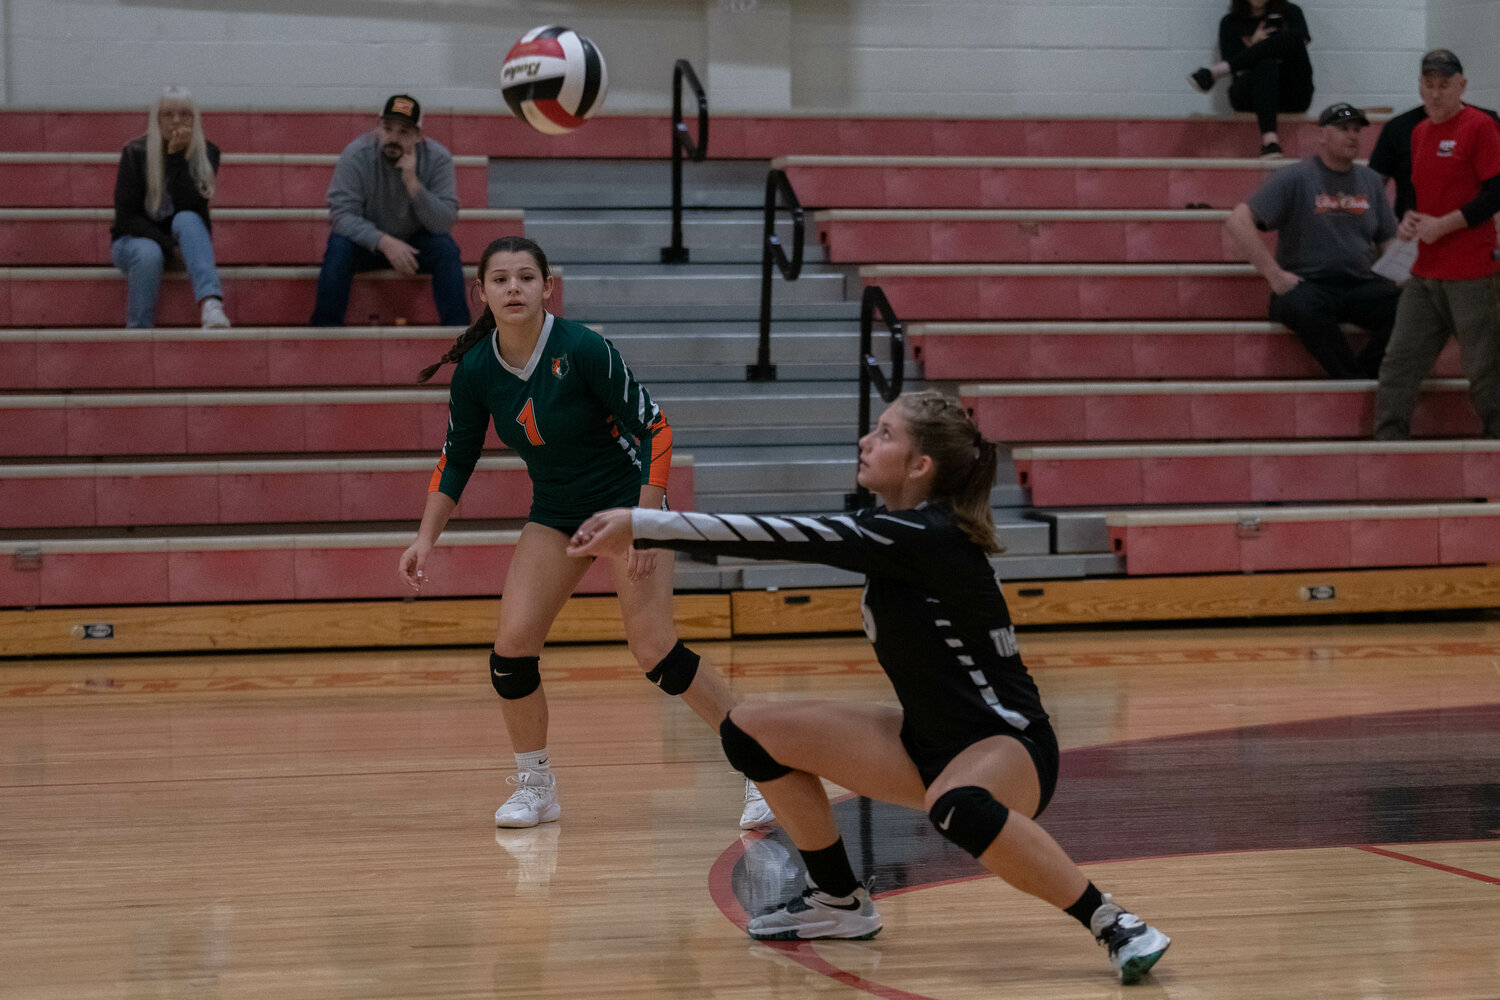 Ryelin Wiedenmann digs the ball up during MWP's match at Toledo on Oct. 19.